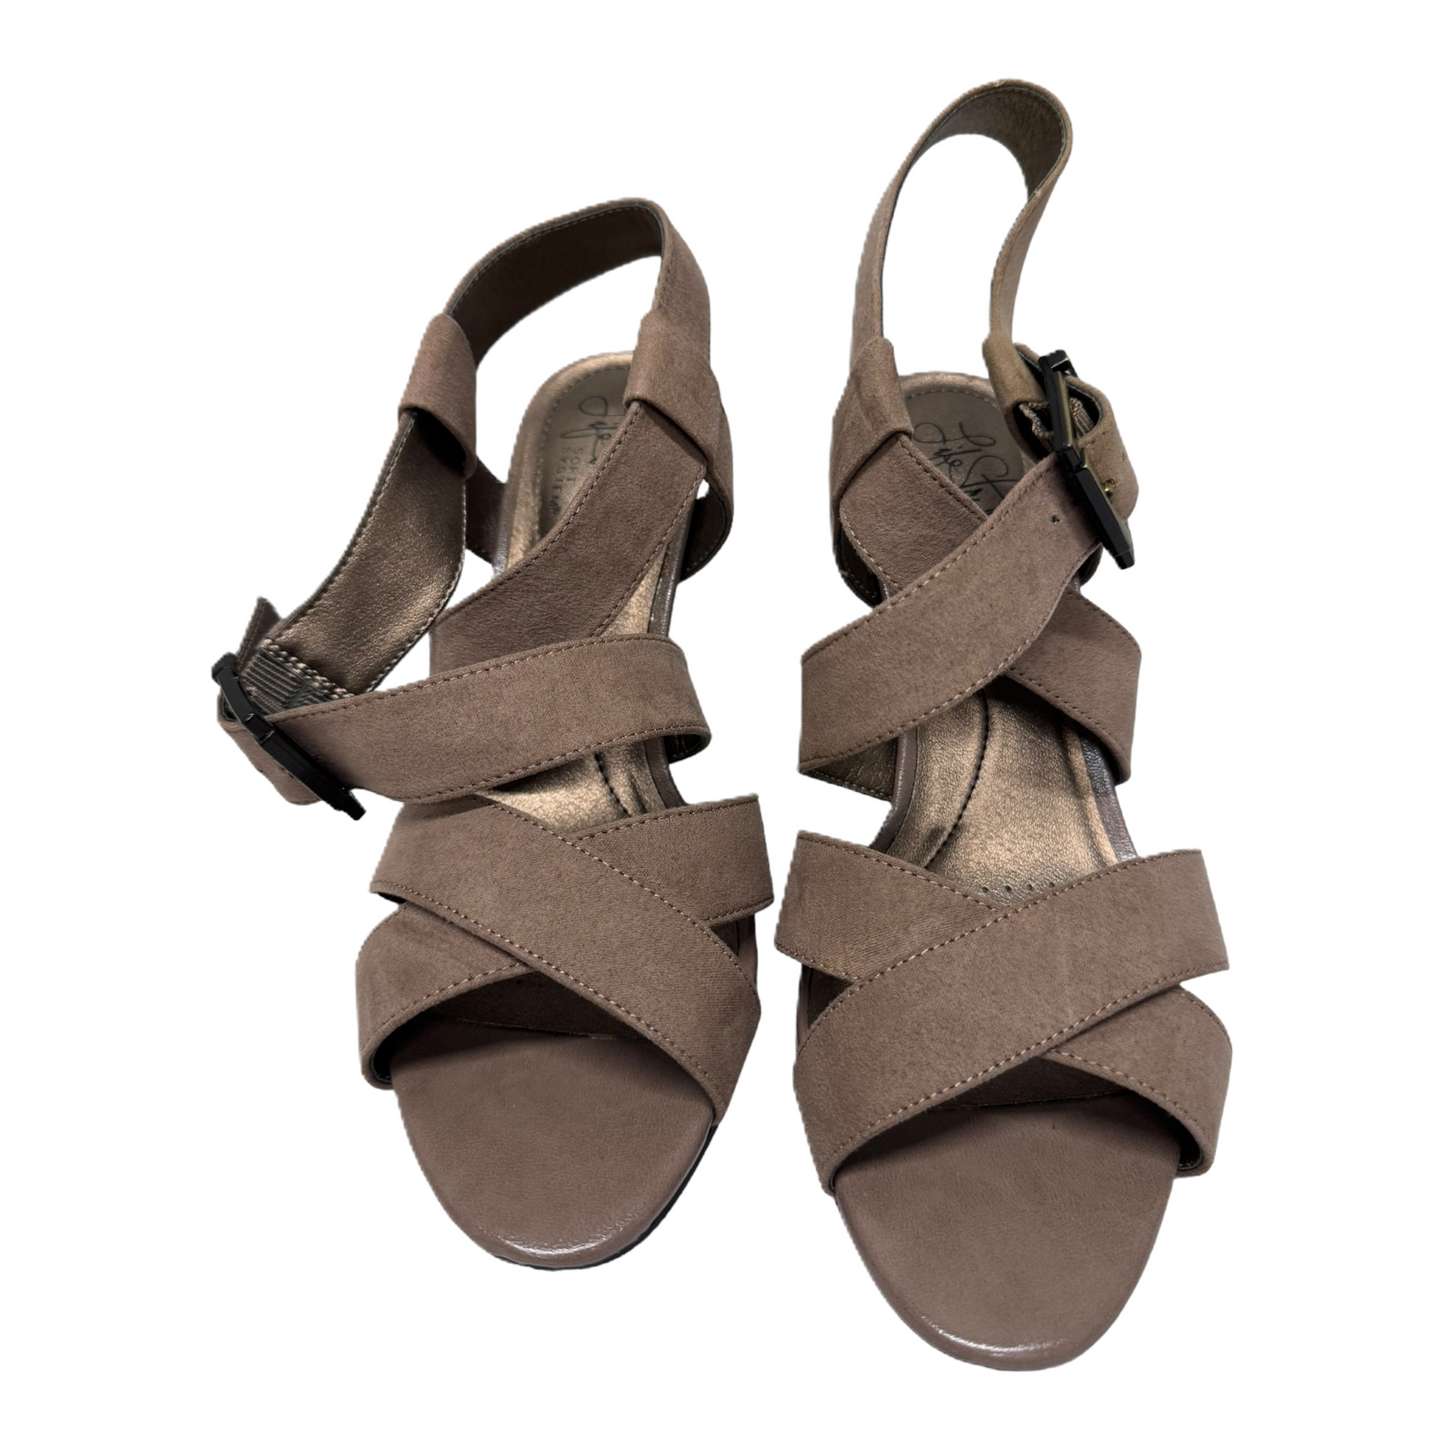 Sandals Heels Block By Life Stride  Size: 8